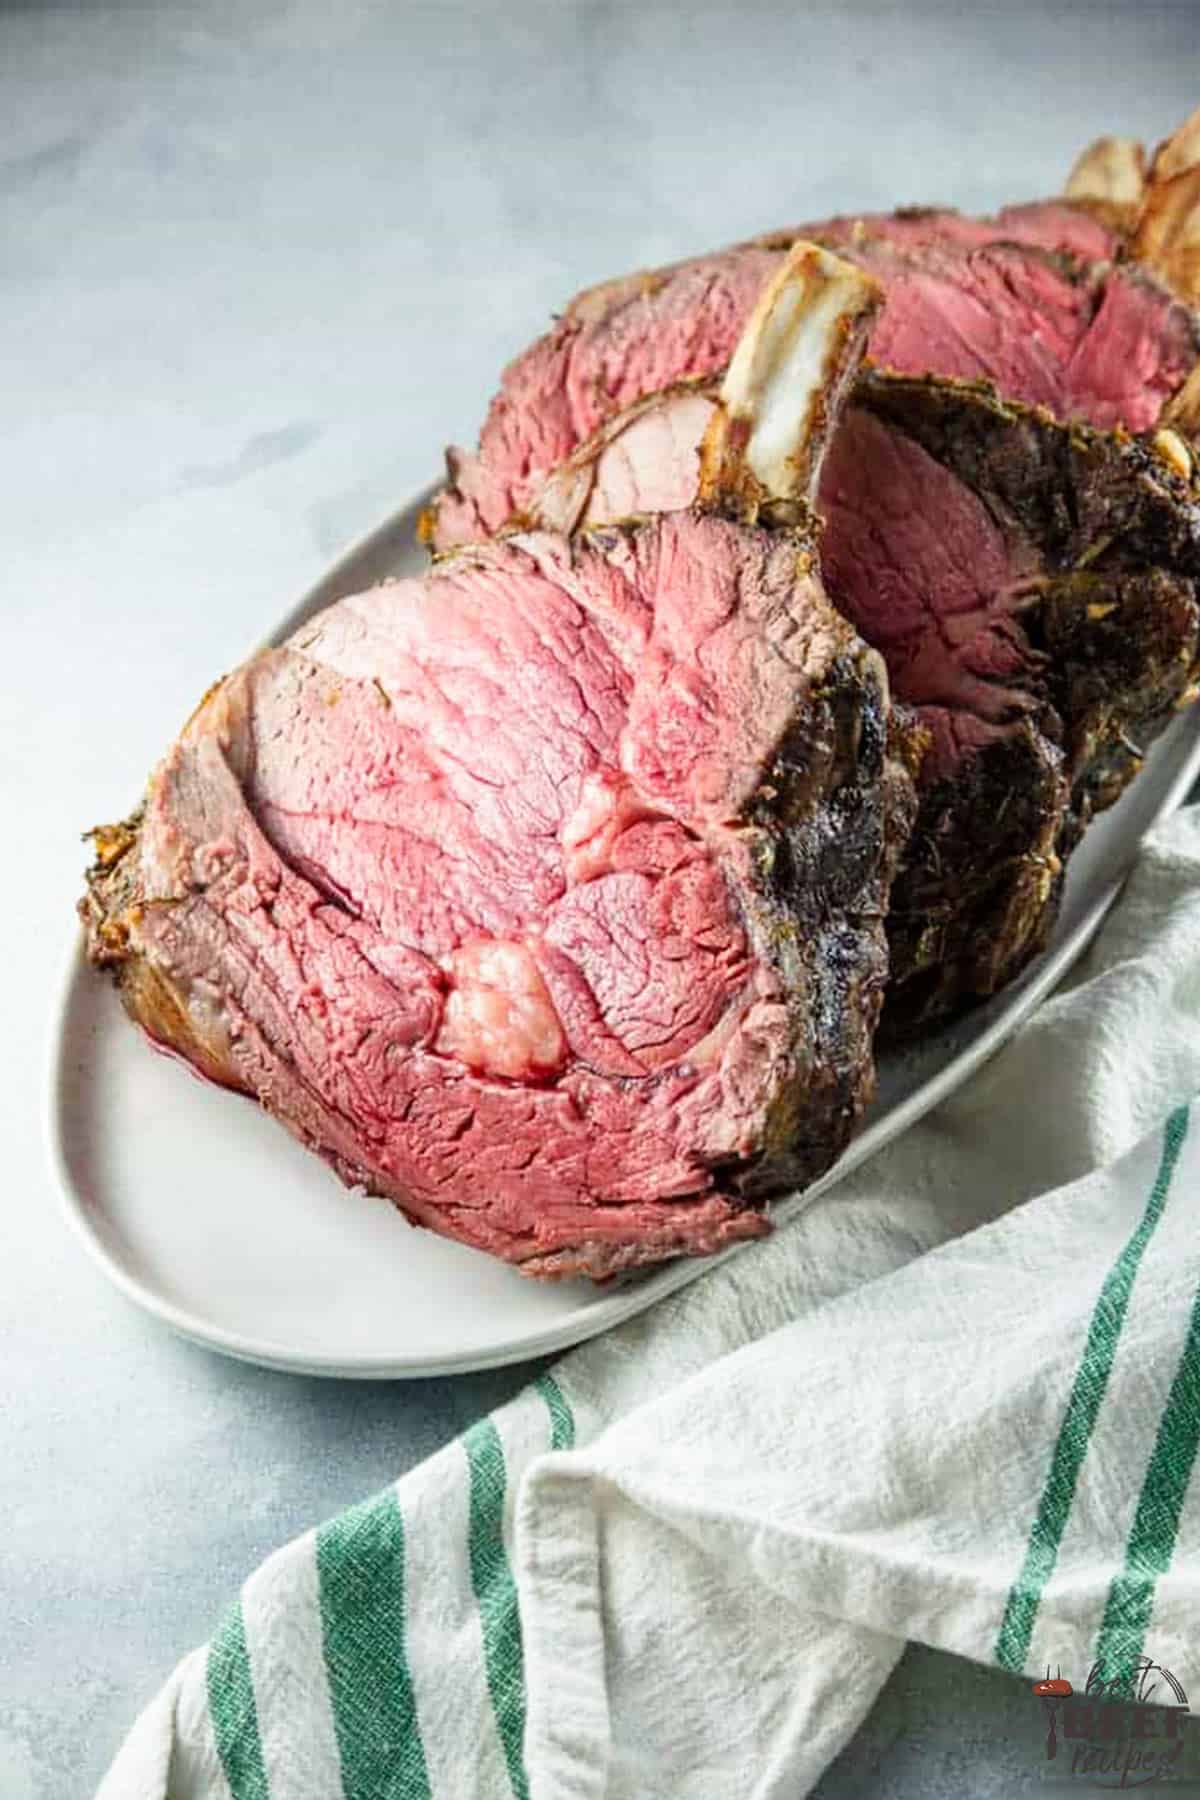 Slices of standing rib roast on a white serving platter